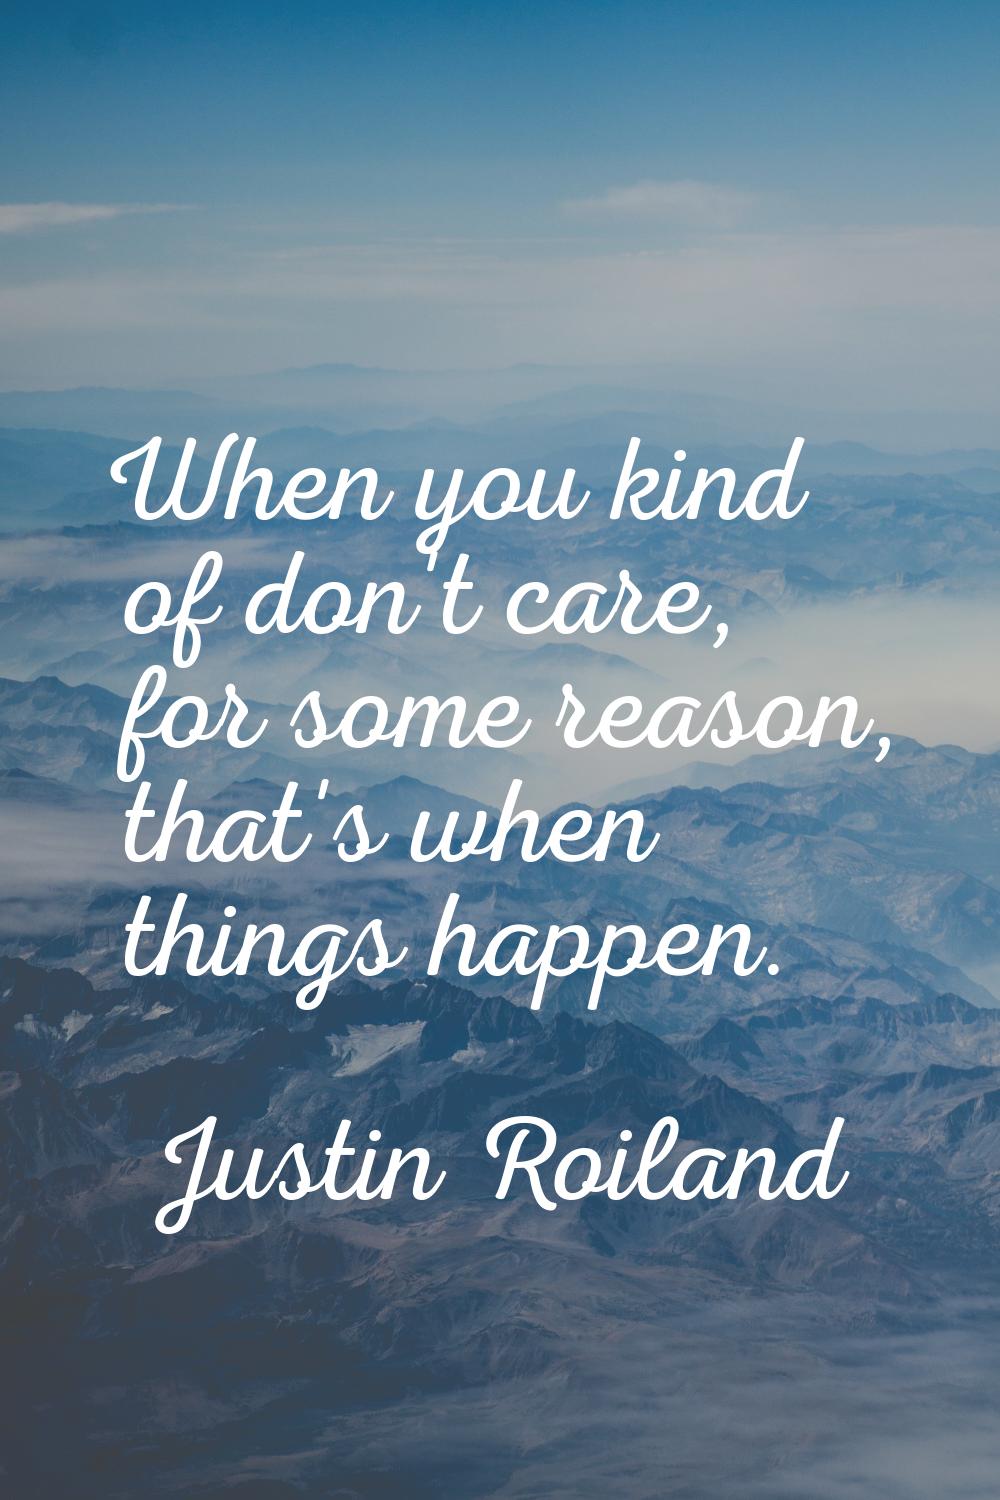 When you kind of don't care, for some reason, that's when things happen.